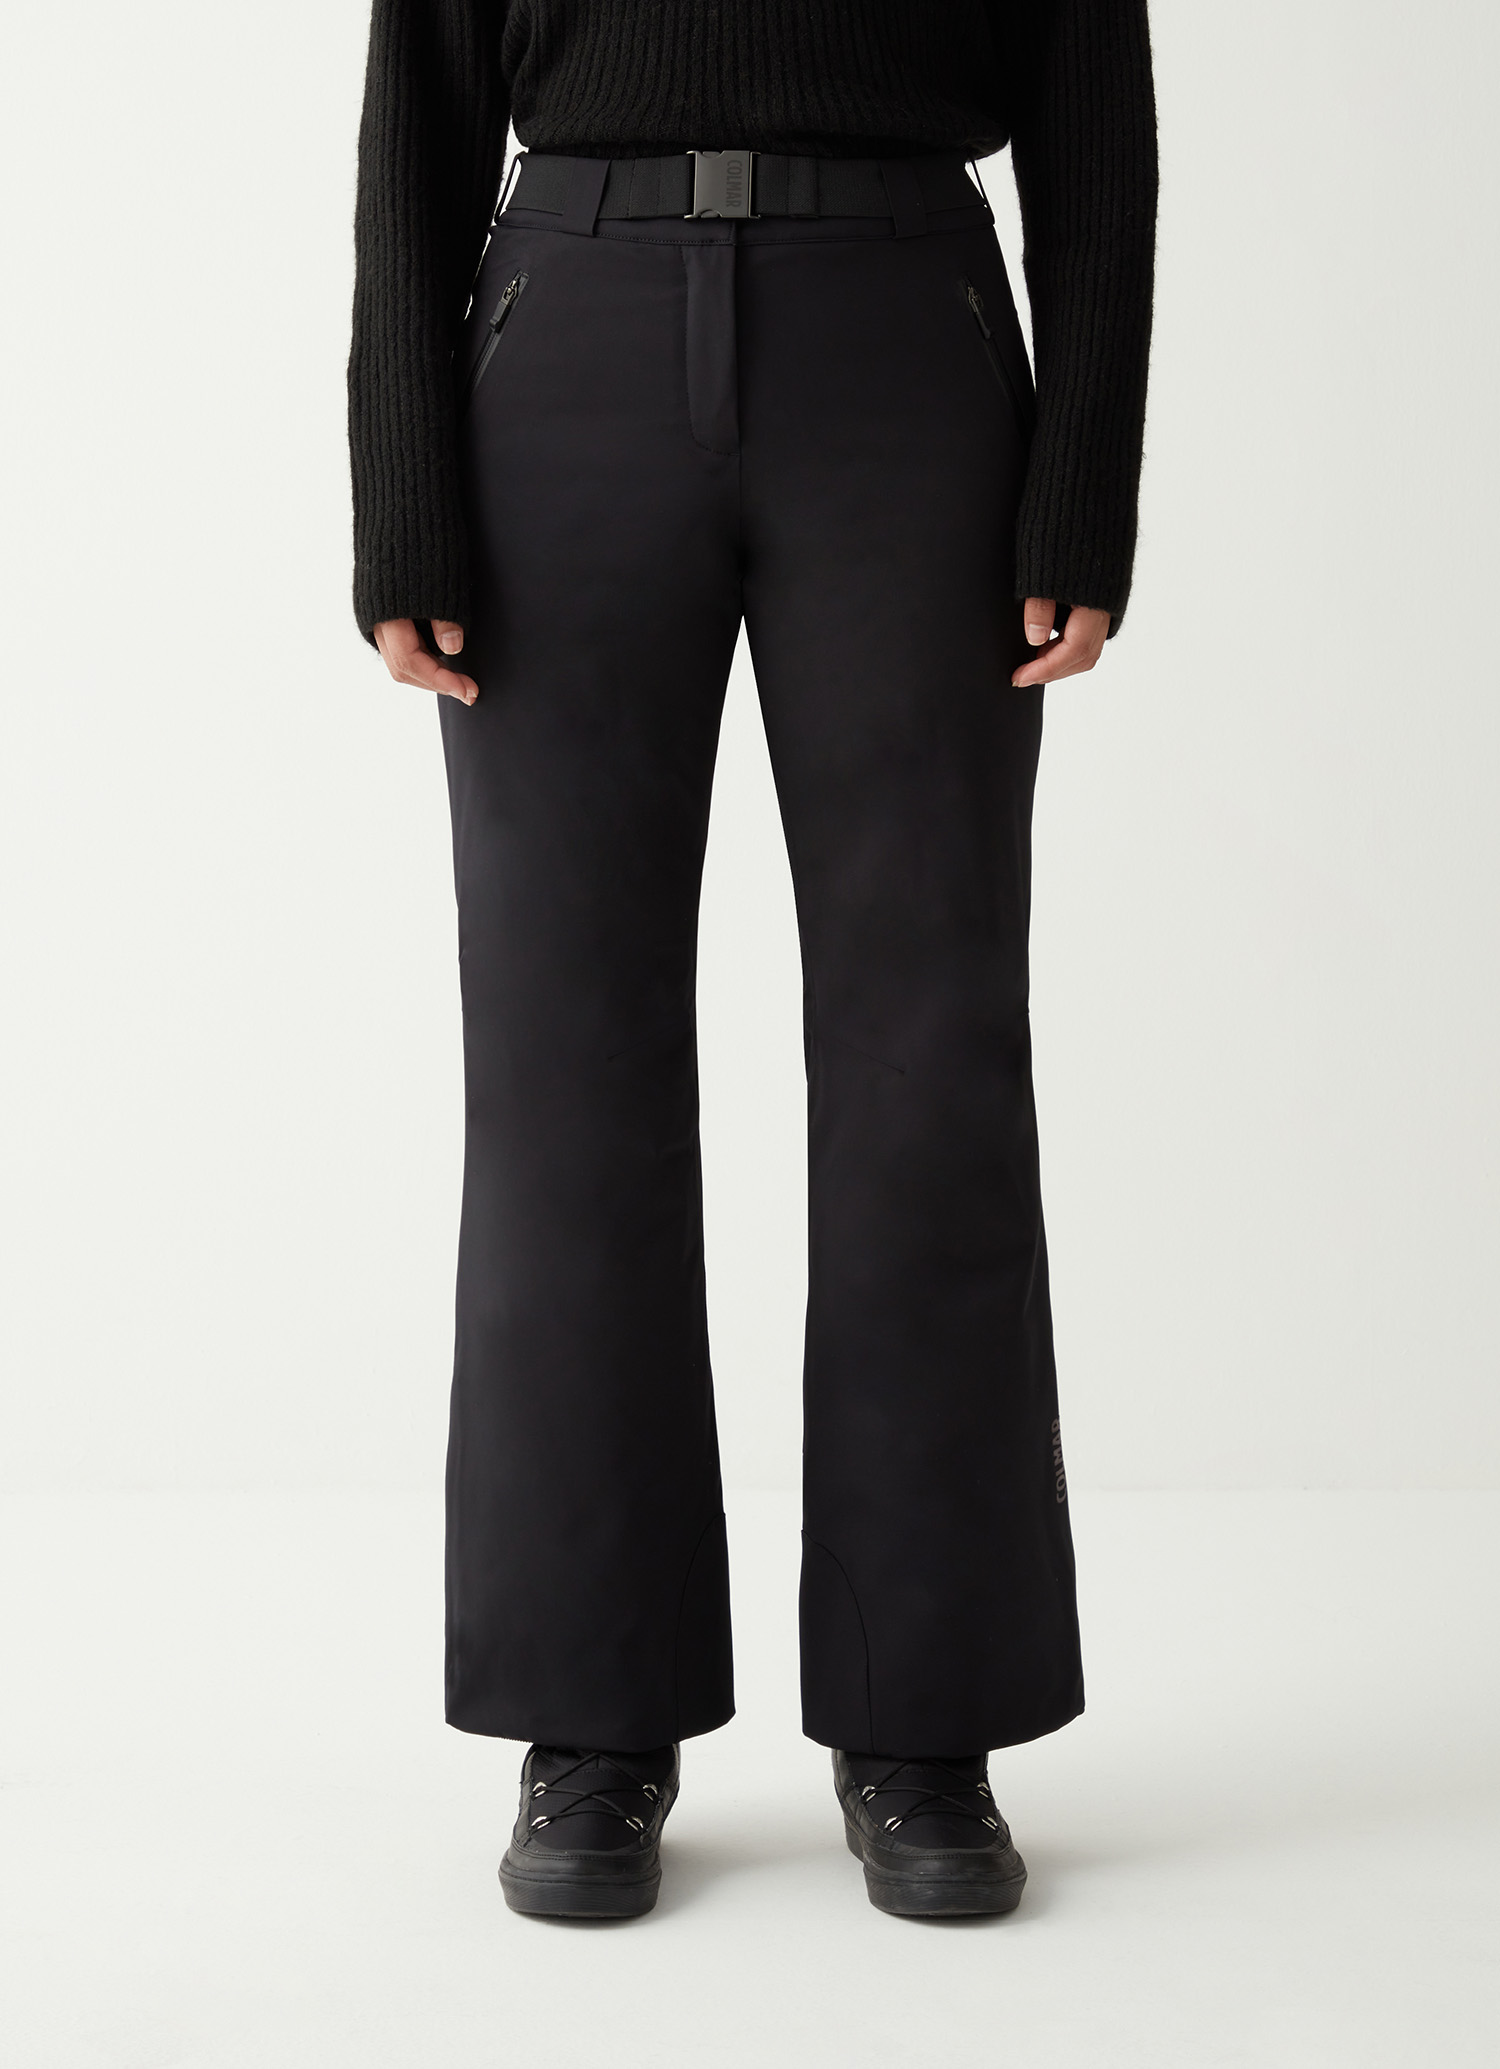 Colmar women's ski pants with a belt and 15,000 mm WPT rating - Colmar